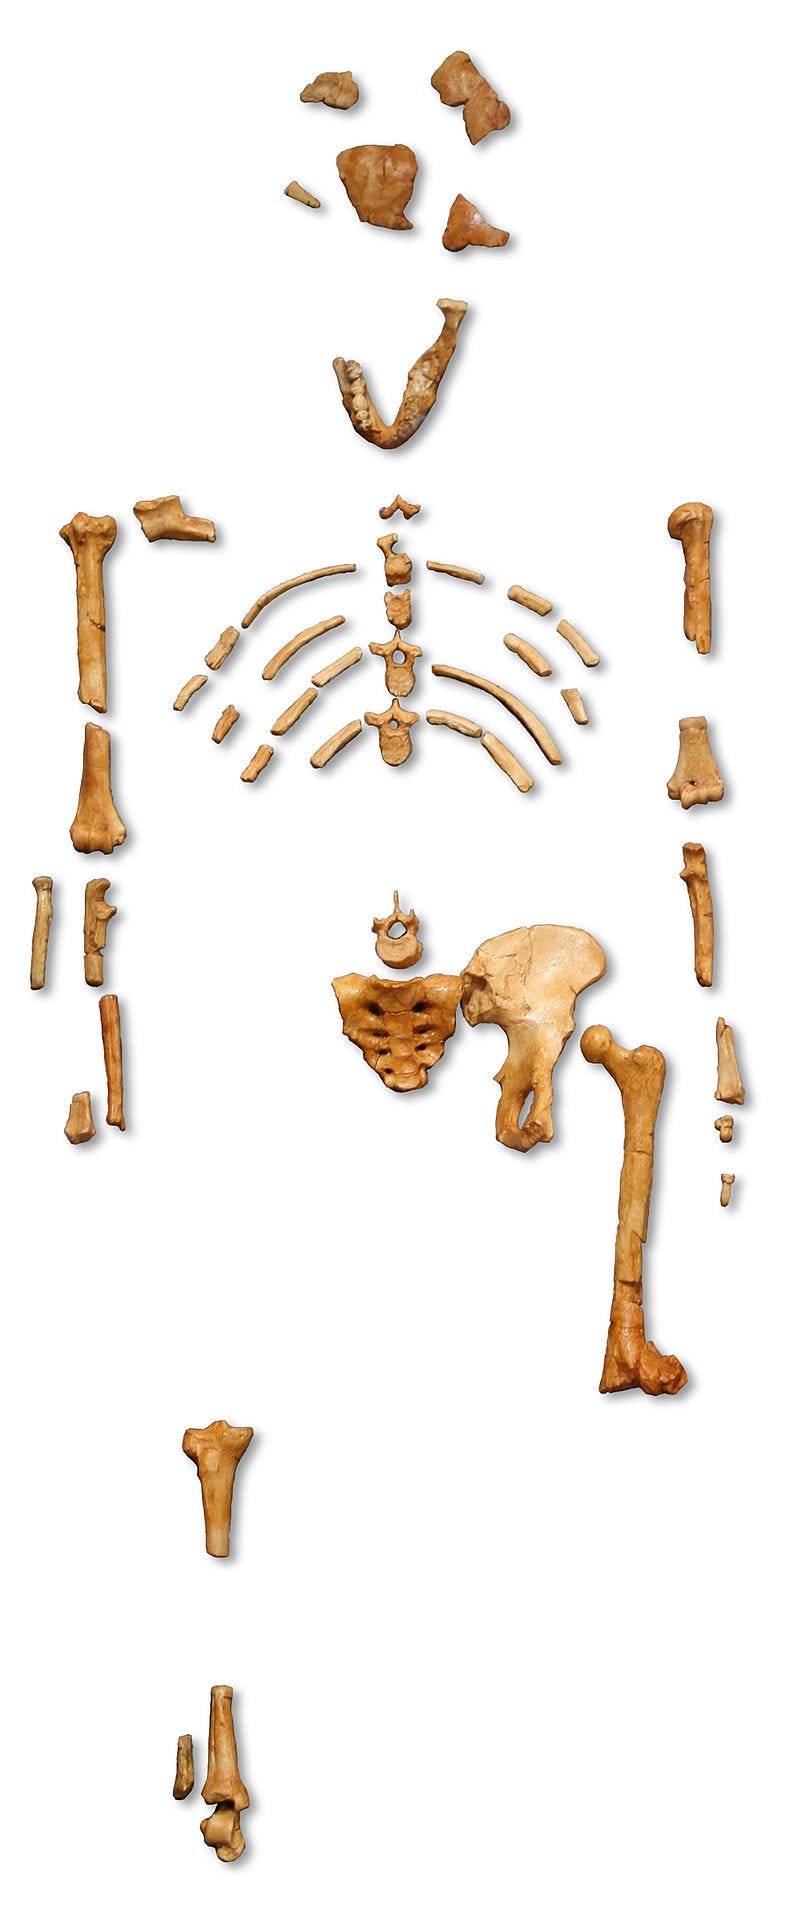 Reconstruction of the fossil skeleton of "Lucy" the Australopithecus afarensis.jpg